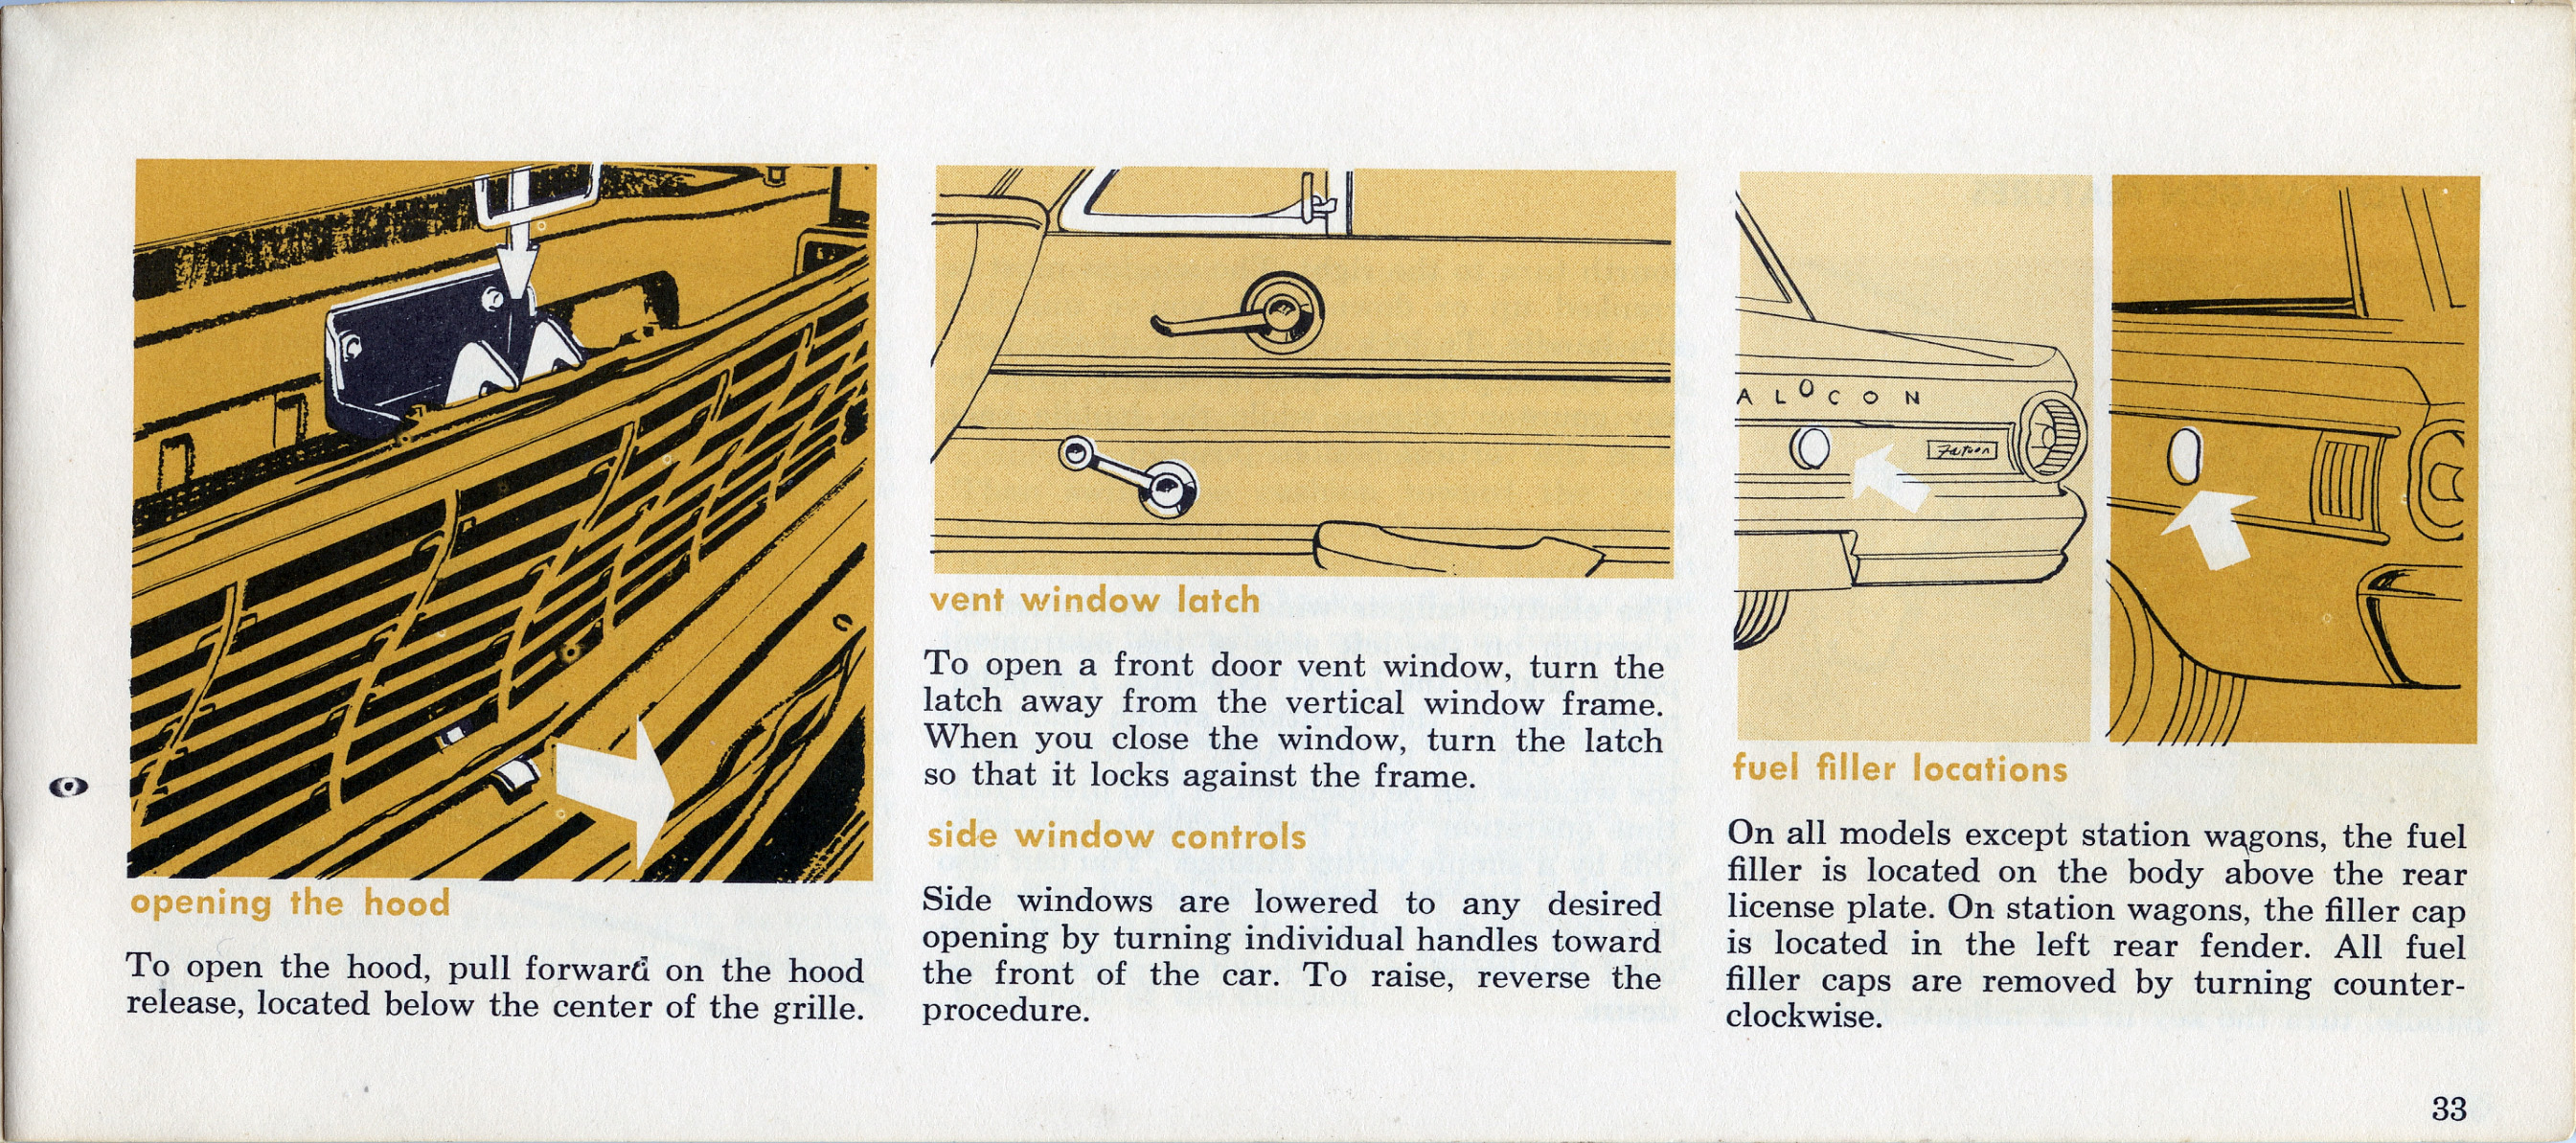 1964 Ford Falcon Owners Manual-33